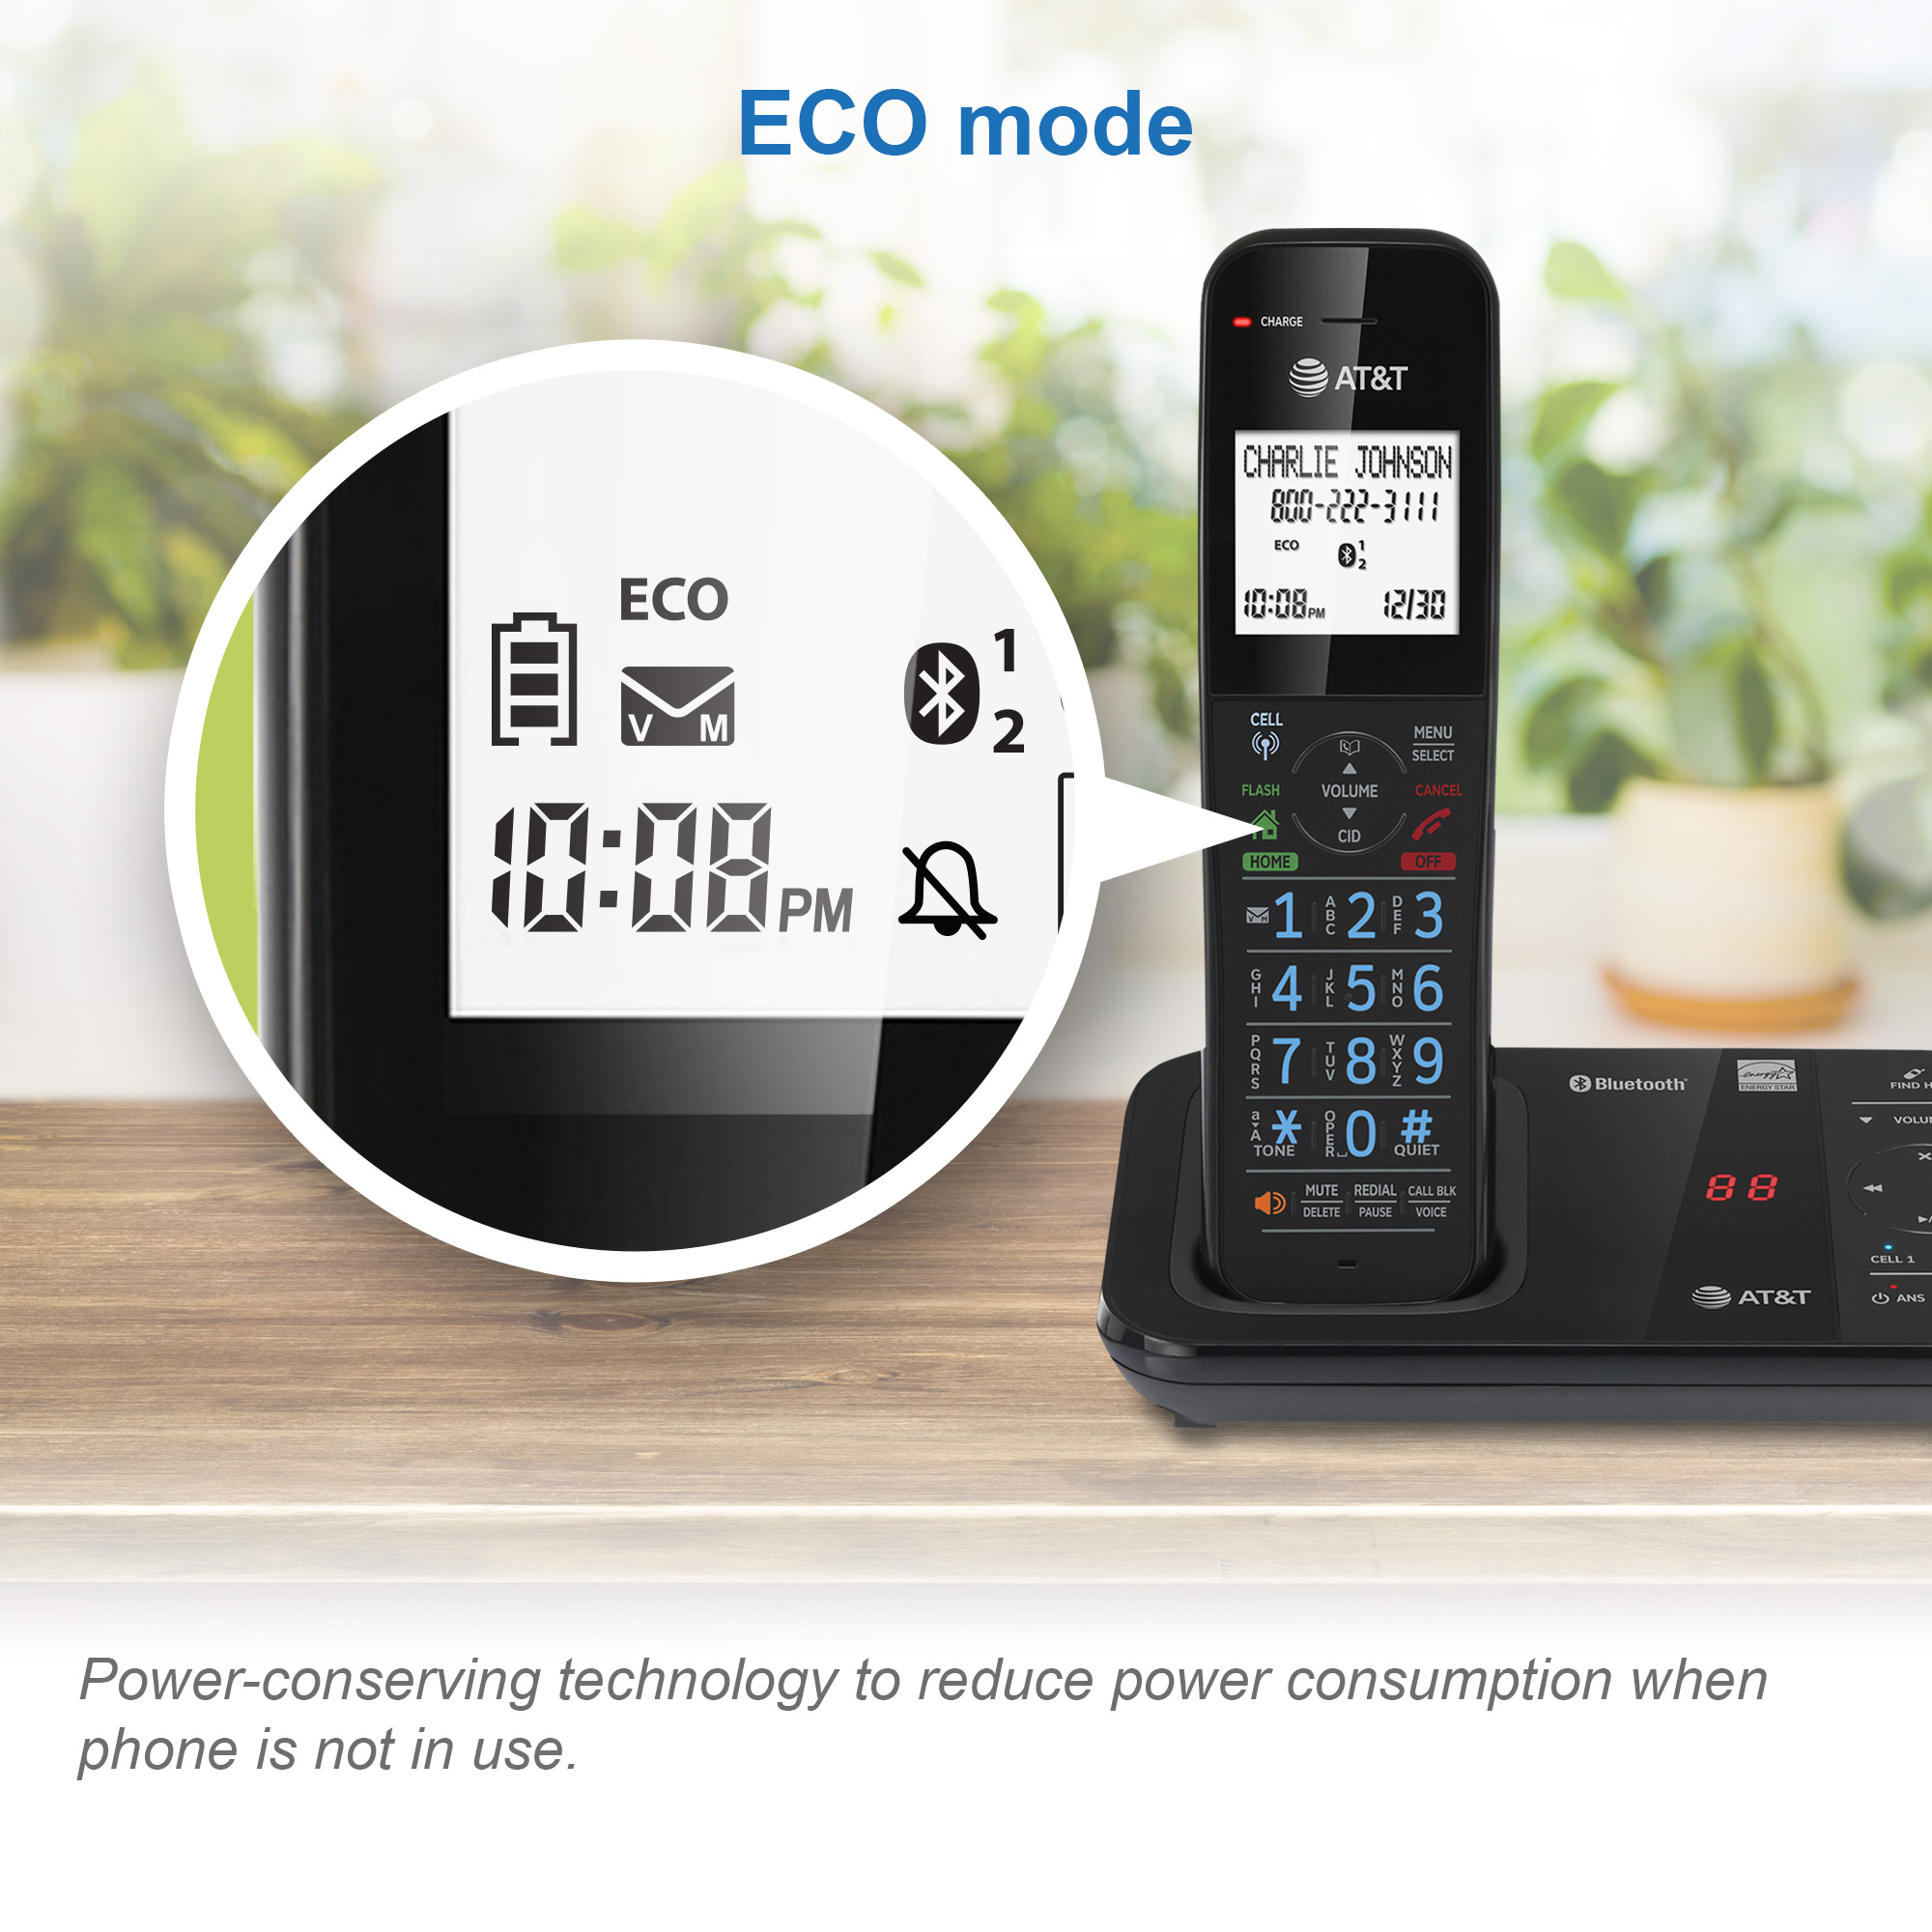 2-Handset Expandable Antibacterial Plastic Cordless Phone with Bluetooth Connect to Cell, Smart Call Blocker and Answering System - view 11